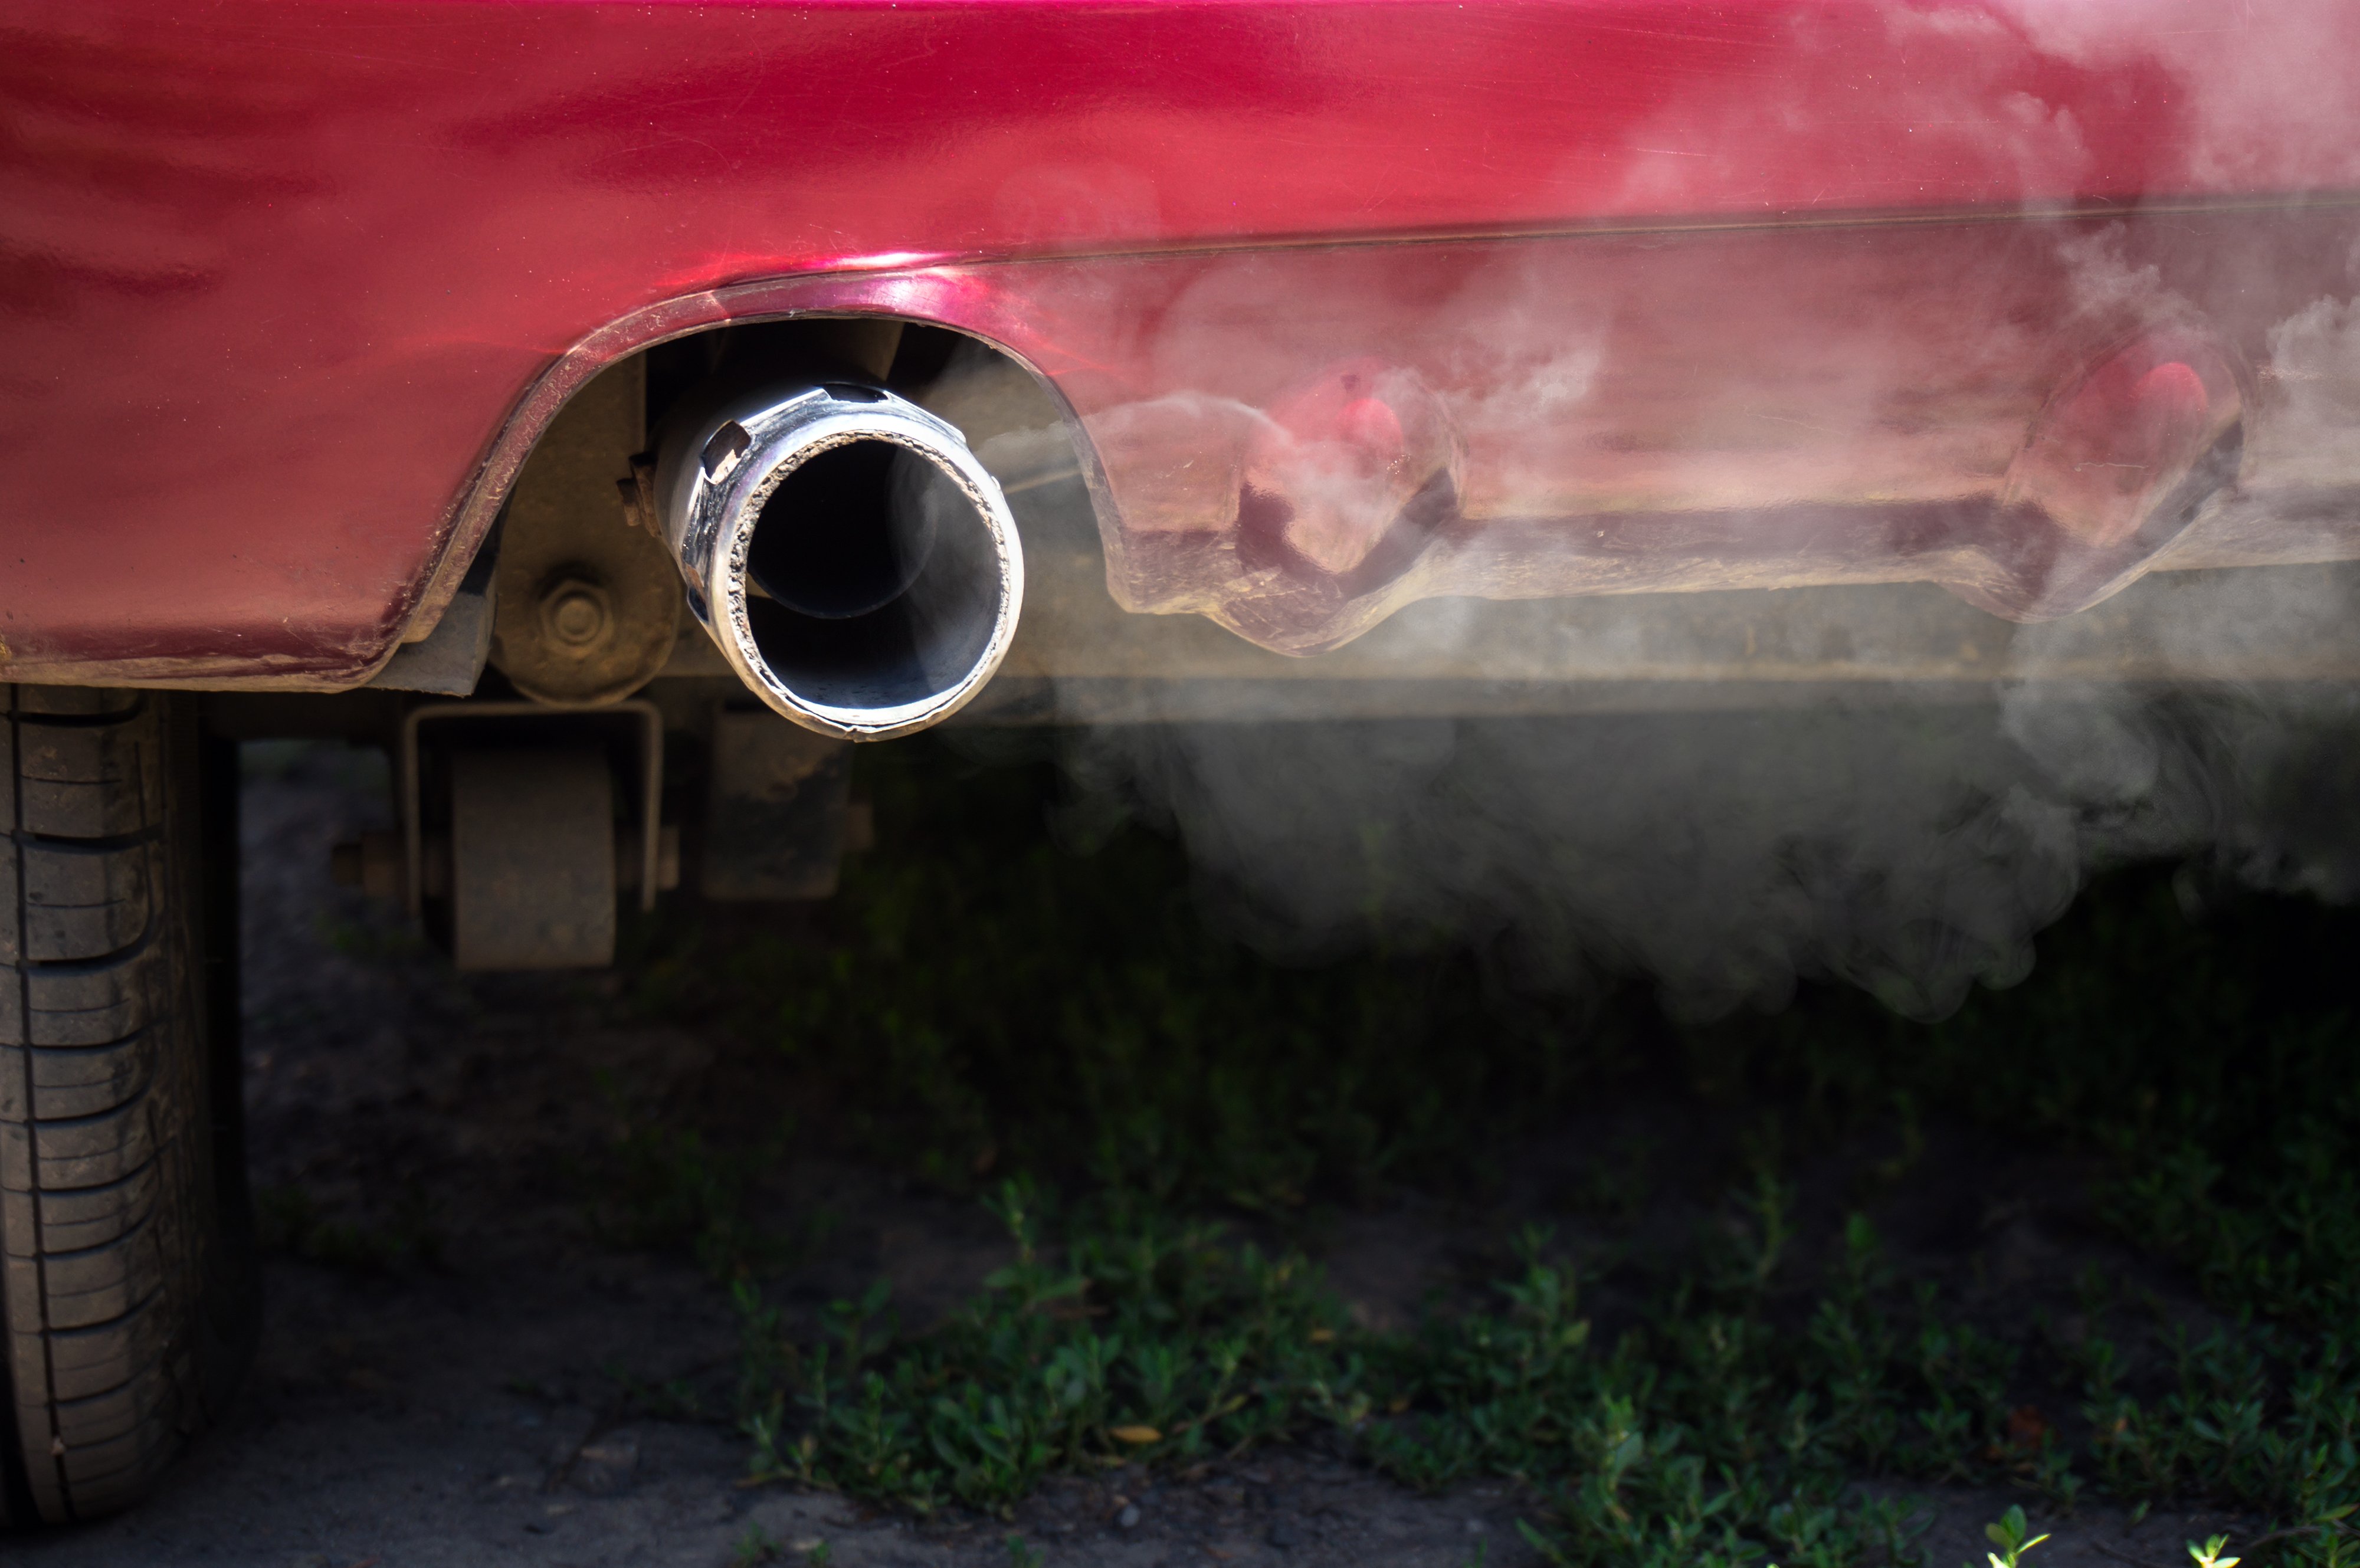 A parked car running with white smoke coming out of the exhaust pipe | Photo: Shutterstock